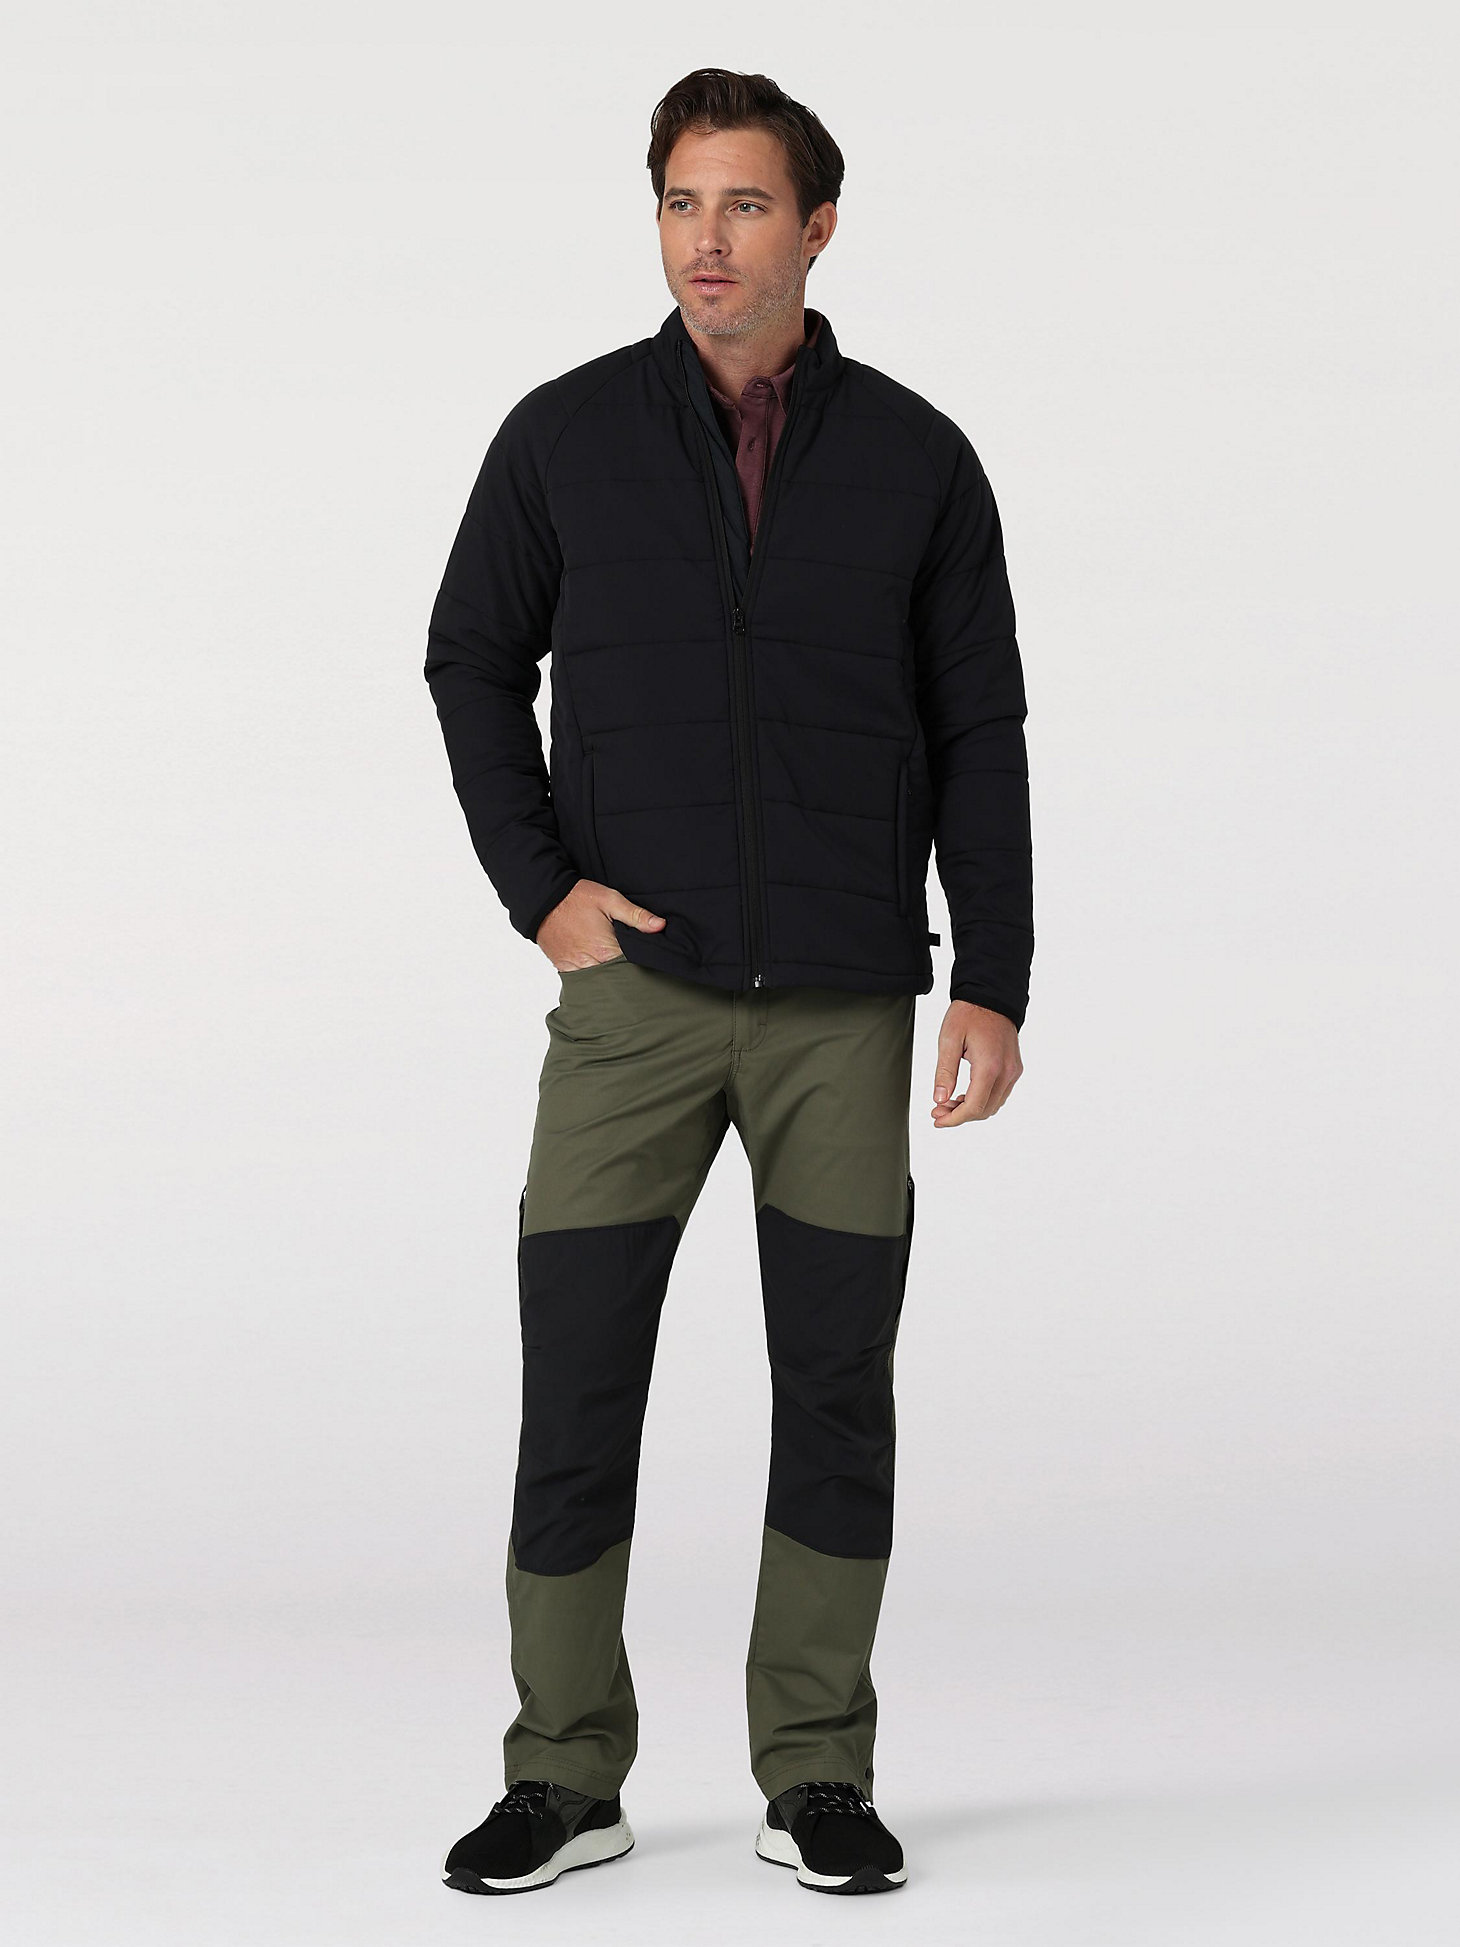 Reinforced Softshell Pant in Dusty Olive alternative view 1